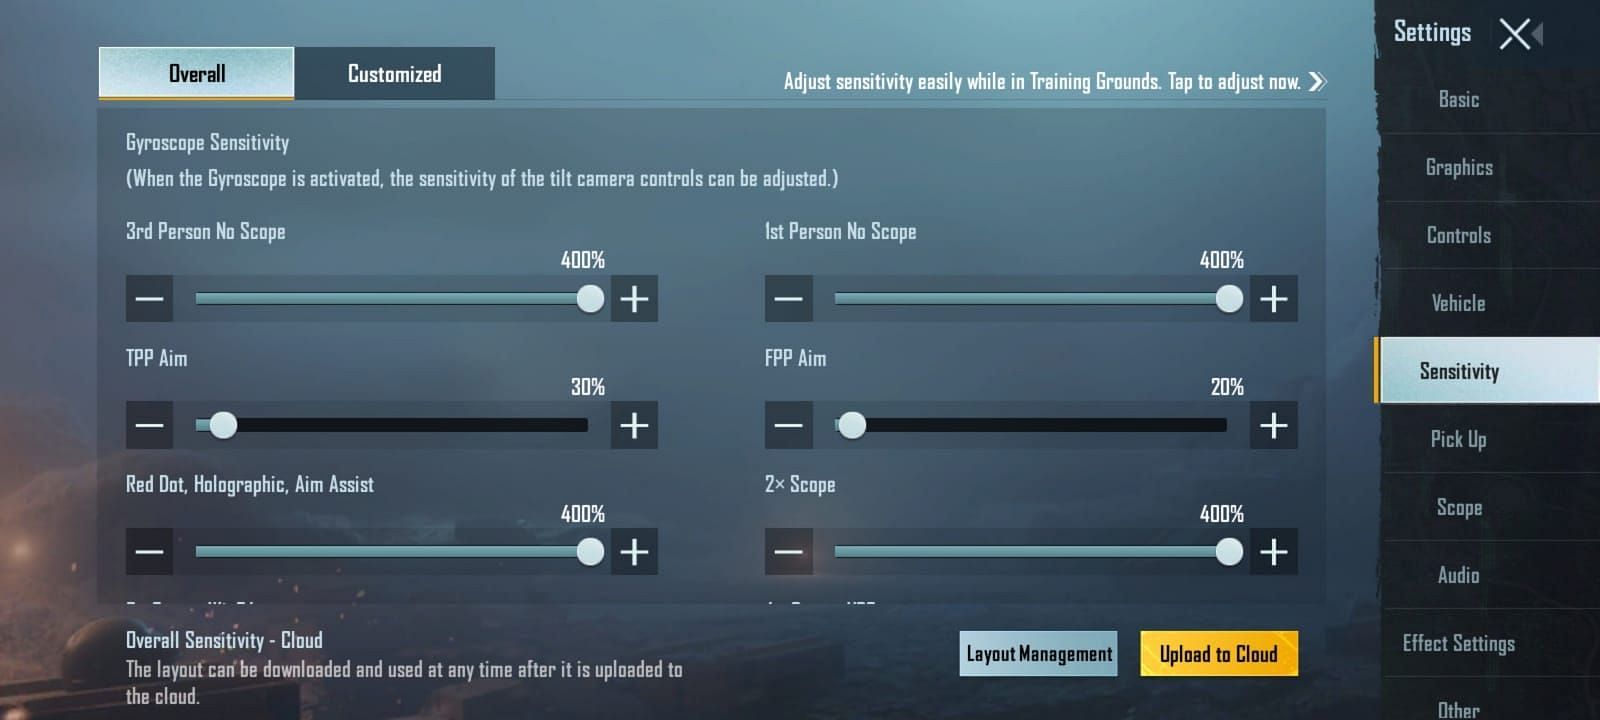 Best BGMI sensitivity settings for no recoil on Android devices